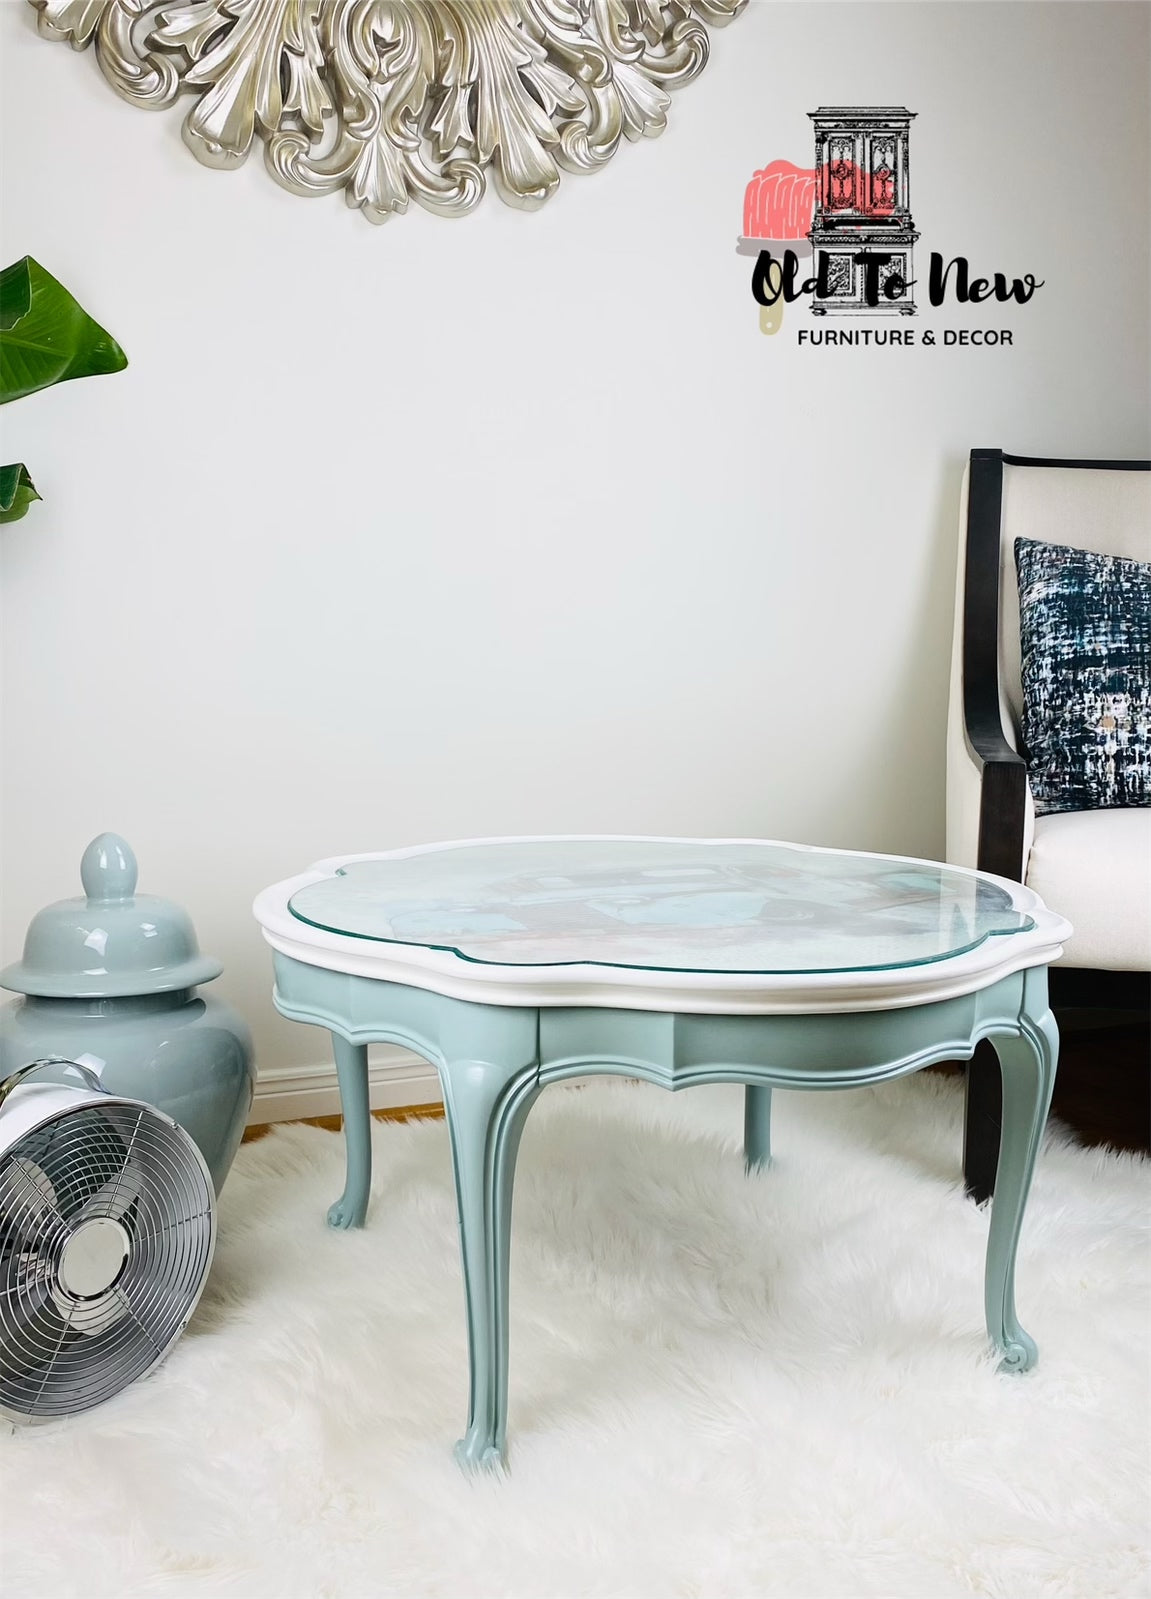 Round French Provincial Center Table, painted white top and mint green sides, classic old car decoupage print on top, protective glass top included